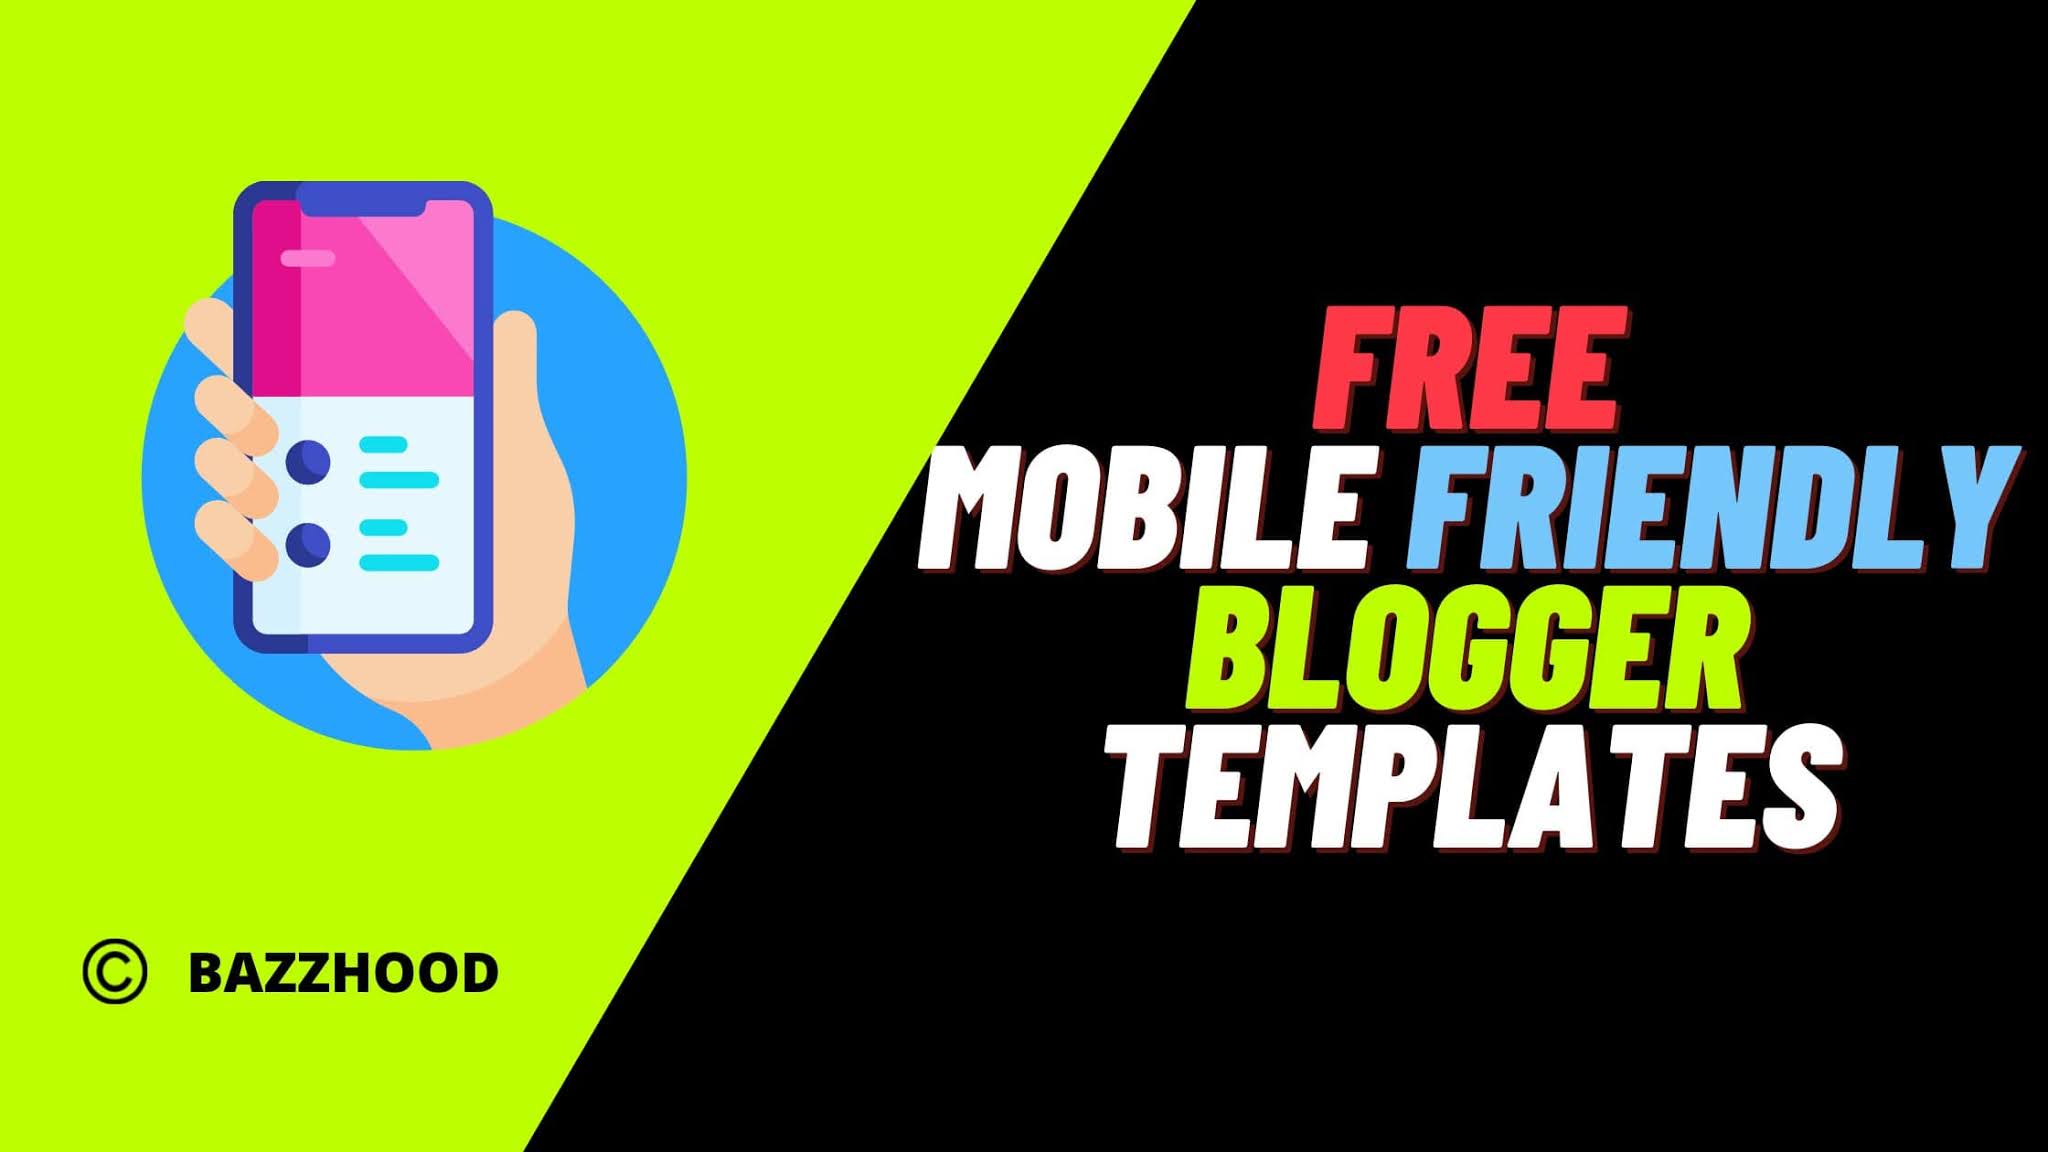 Free Mobile Friendly Blogger Templates